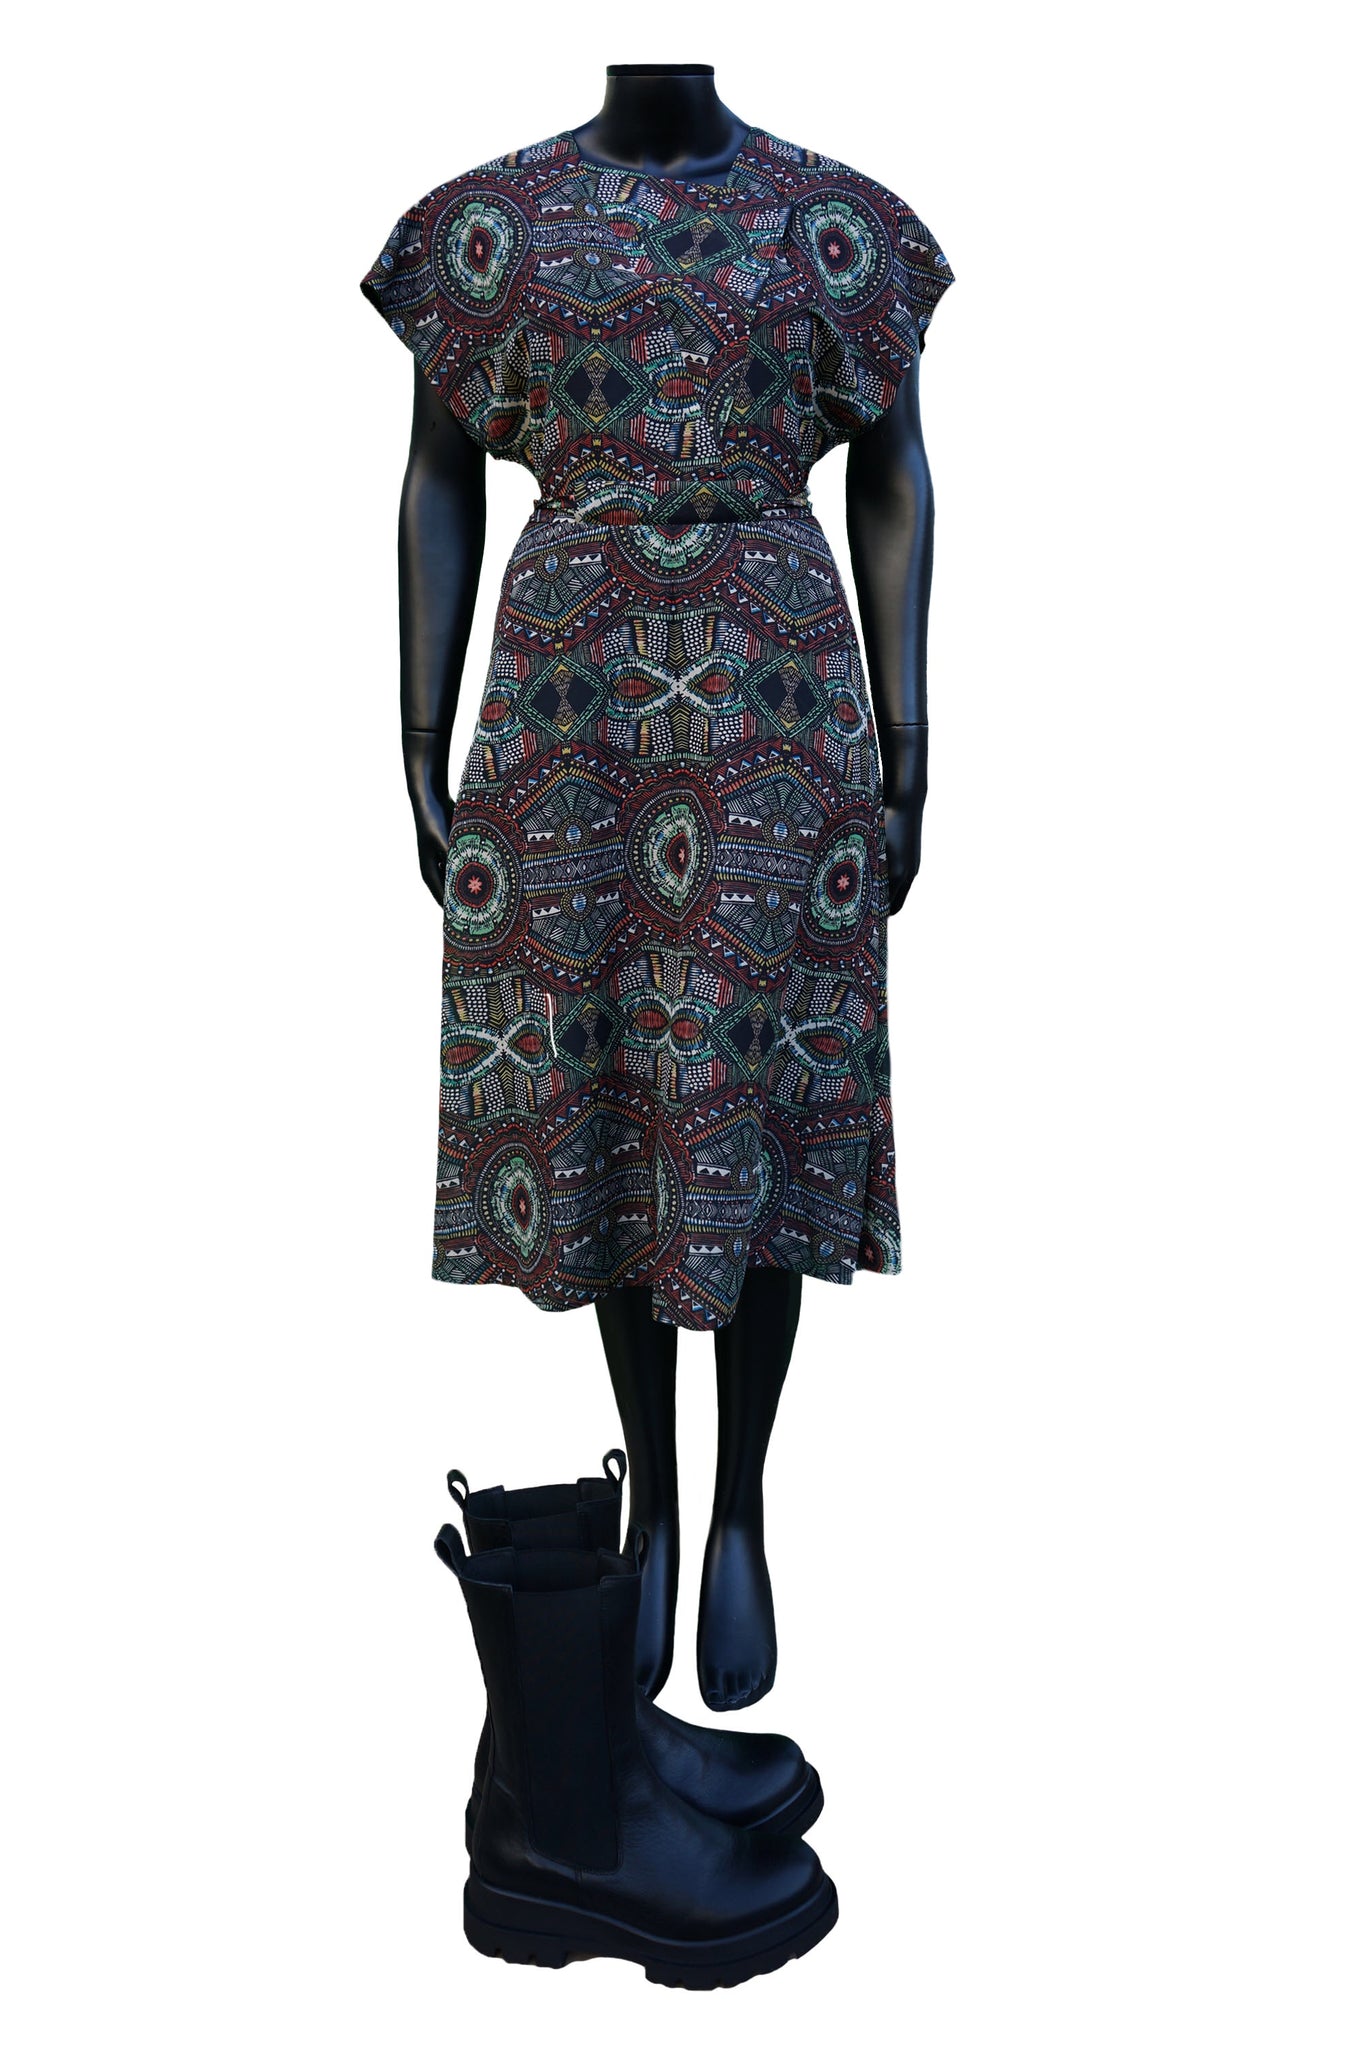 adddress R259 Dress With Colourful Print